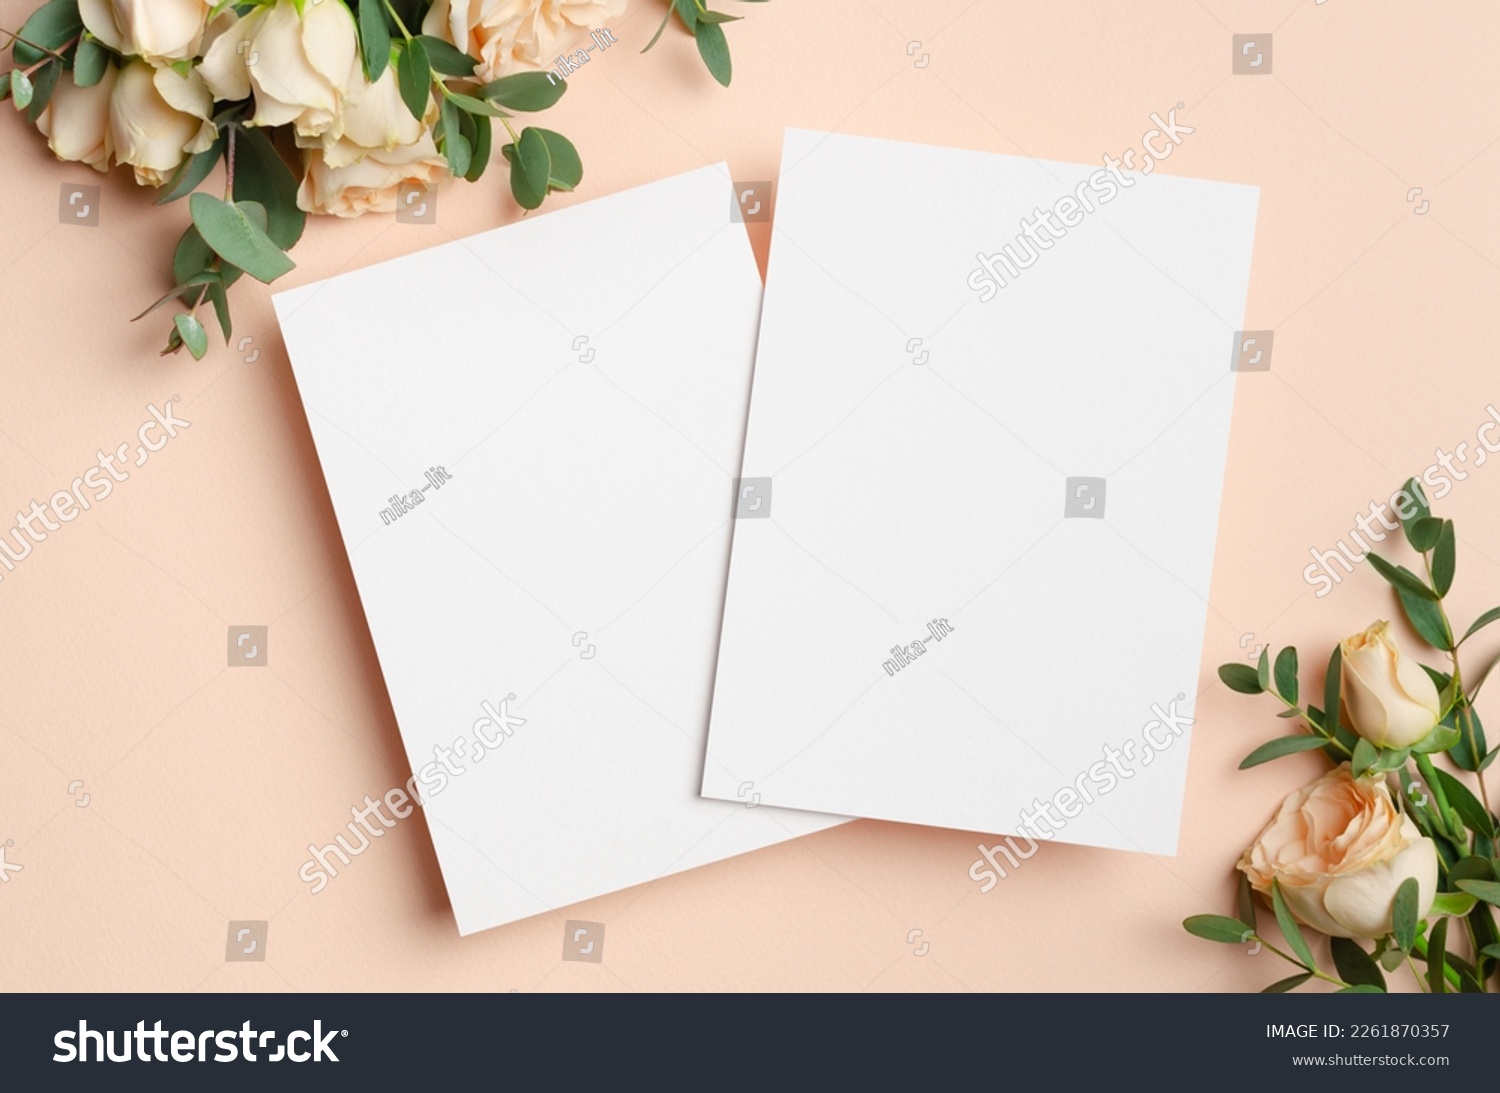 Blank wedding invitation card mockup with flowers, save the date card mockup with copy space #2261870357